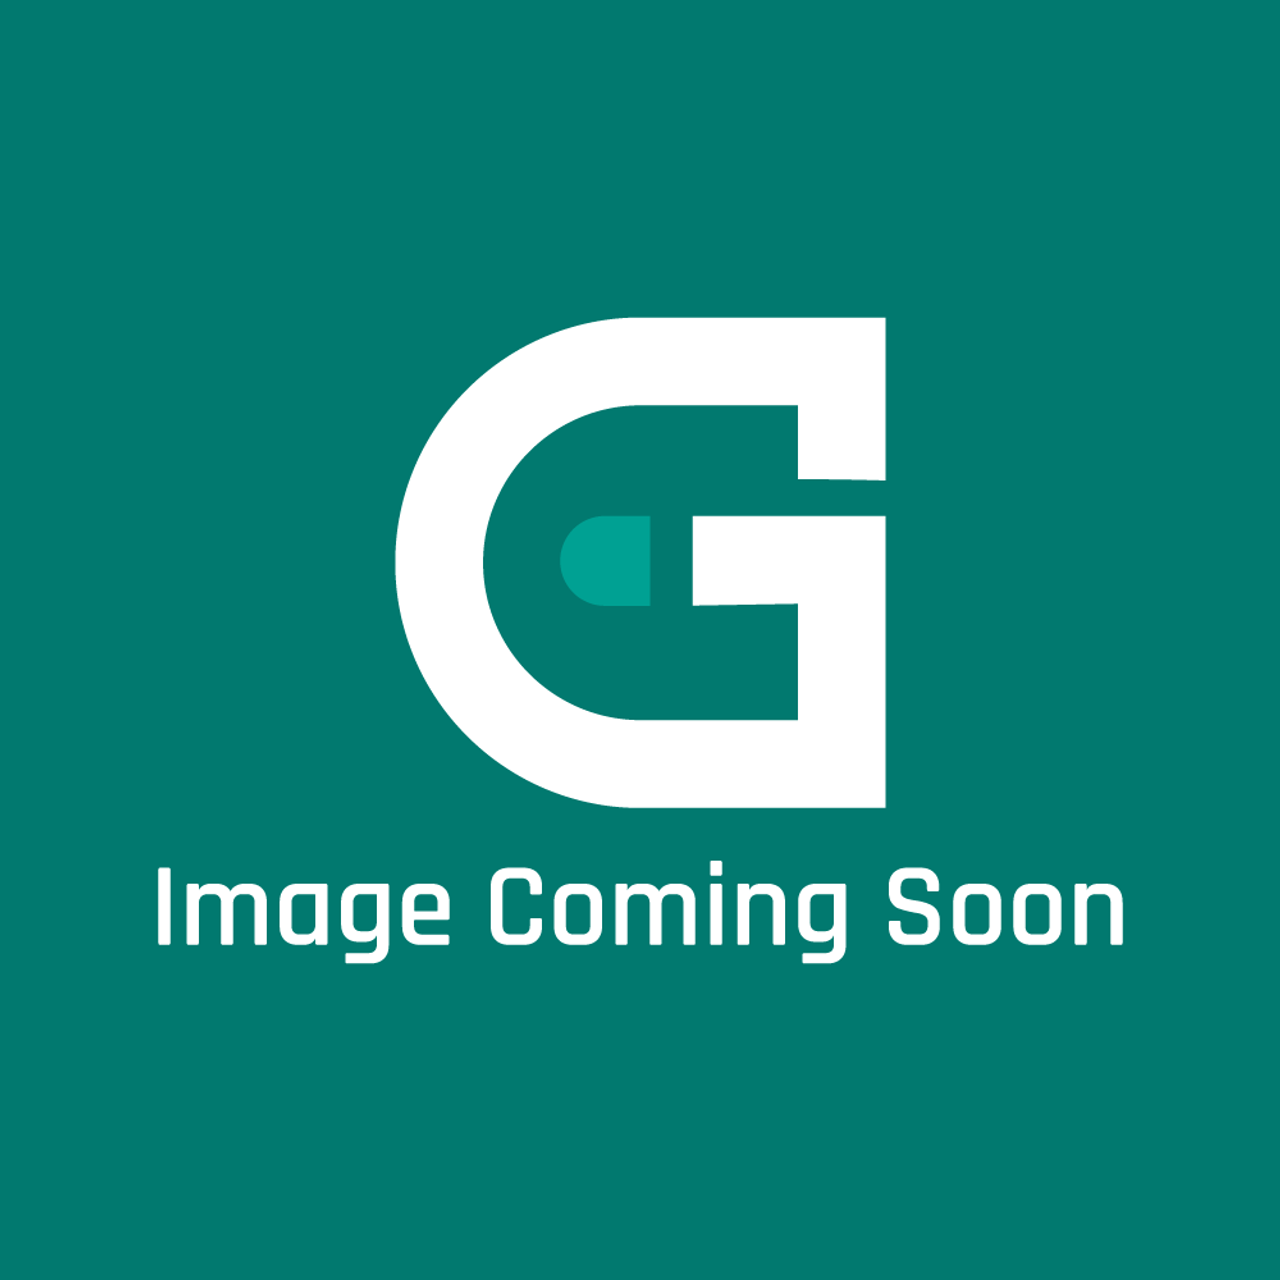 Frigidaire - Electrolux 5304515801 Console - Image Coming Soon!